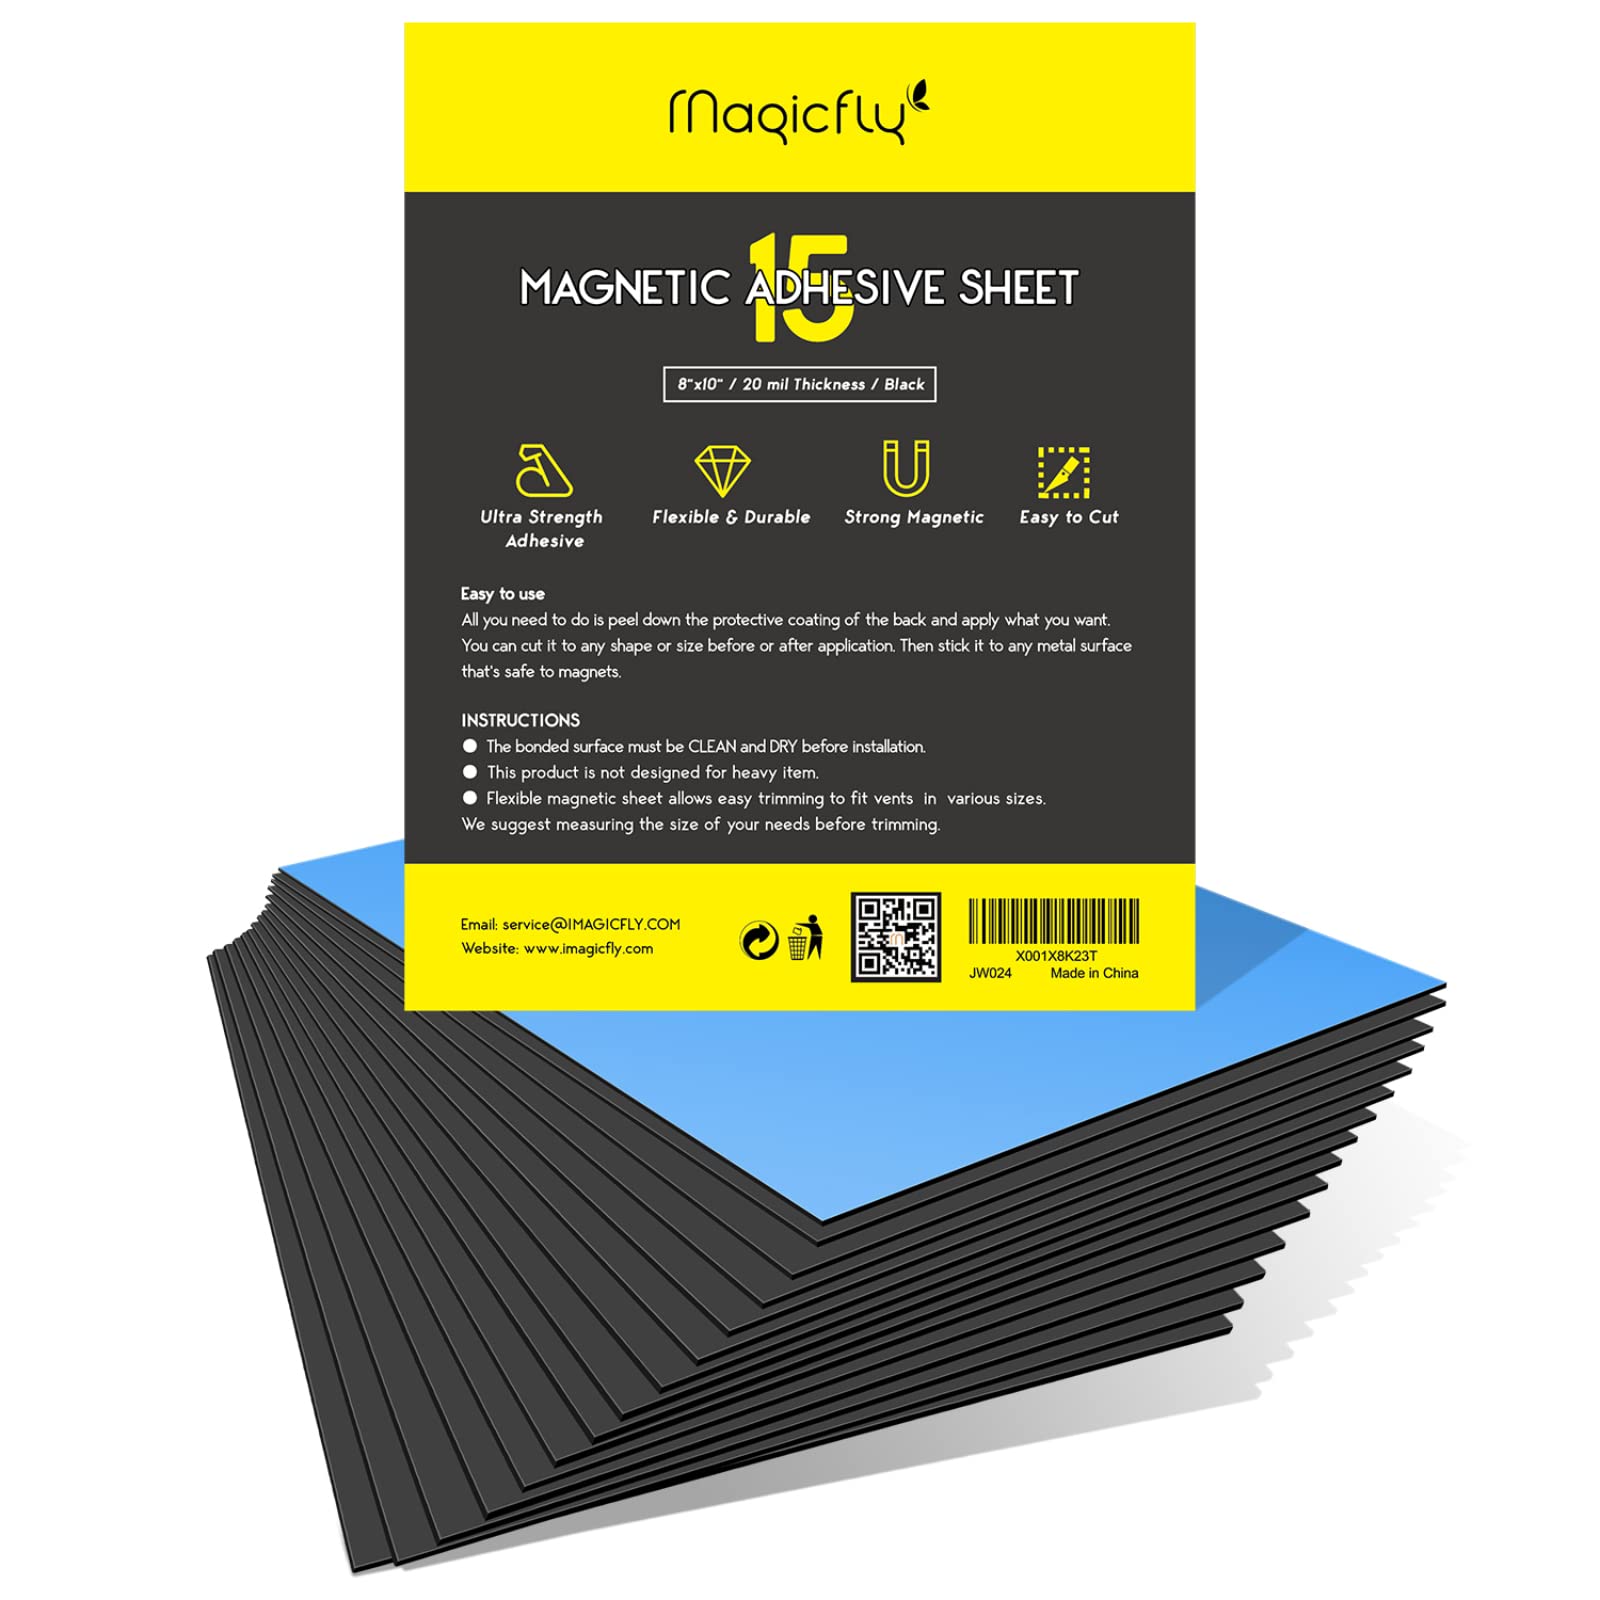 Magicfly Magnet Adhesive Sheets 8 x 10 Inch, 15 Pack Flexible